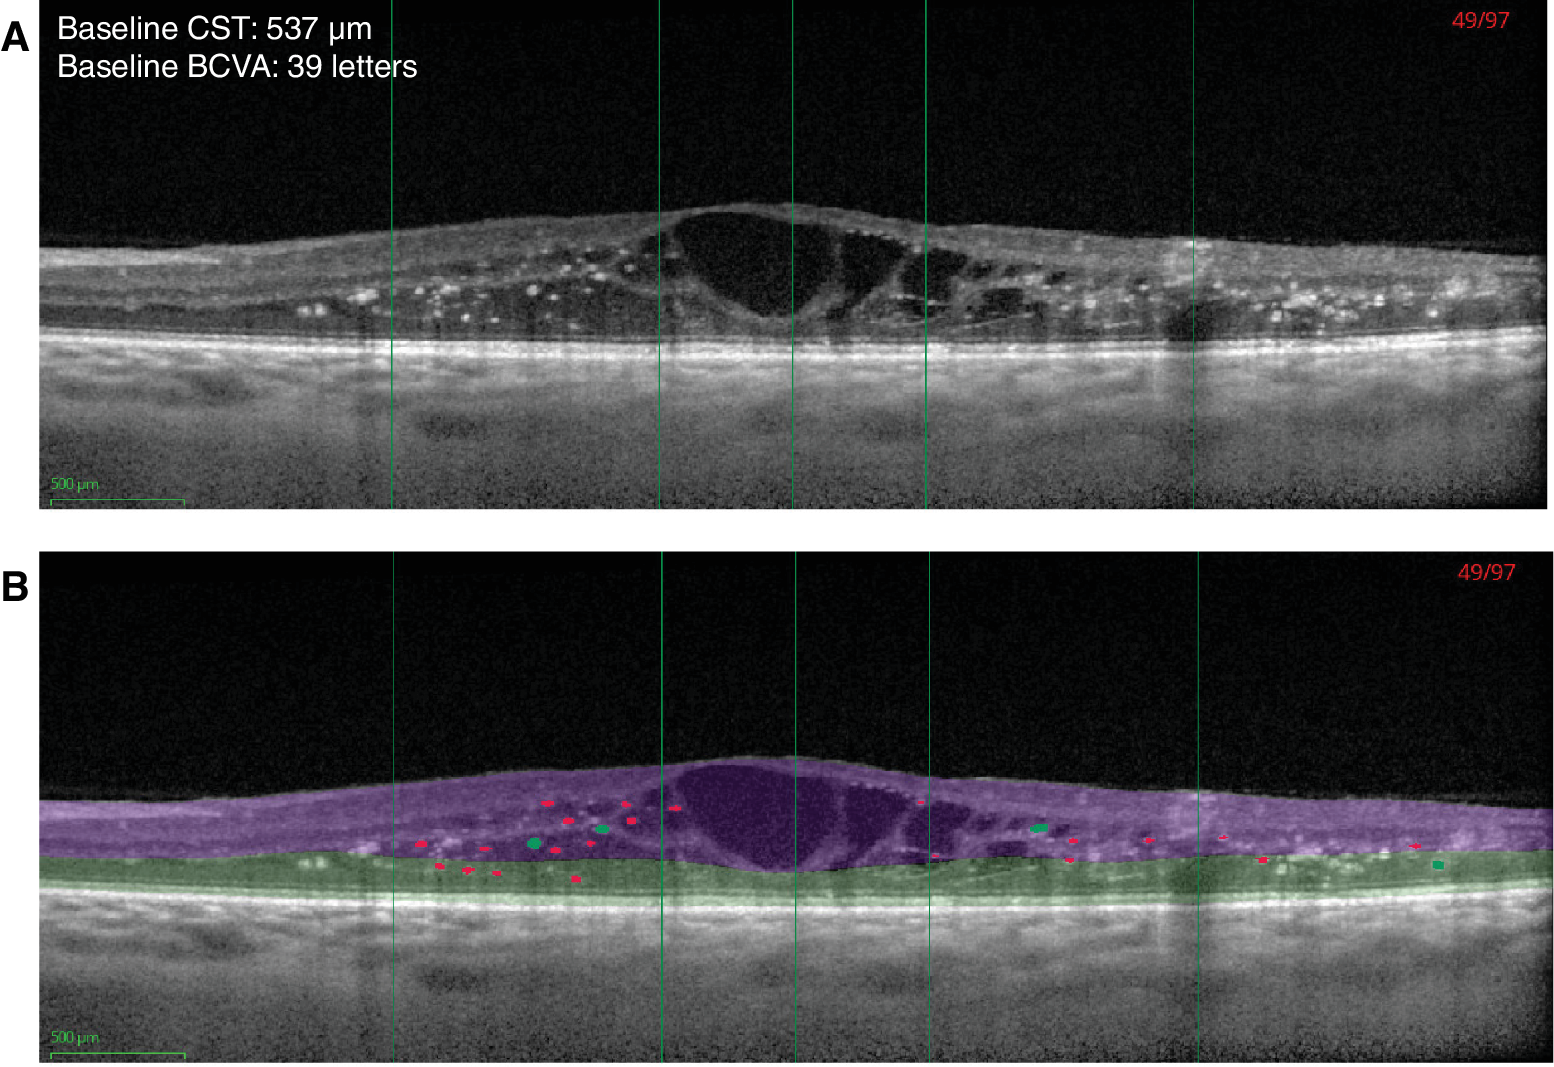 This image from the study shows automated hyperreflective foci (HRF) segmentation on SD-OCT without (A) and with (B) segmentation of layers. HRF ≤50µm are shown in red and larger (>50µm and ≤100µm) intraretinal hyperreflective objects in green. The algorithm filtered out objects >100µm; hence, these objects are not colored in the figure. ETDRS rings are indicated with green vertical lines (center, 1mm and 3mm diameter rings). Inner retina is shown in purple and outer retina in green. 